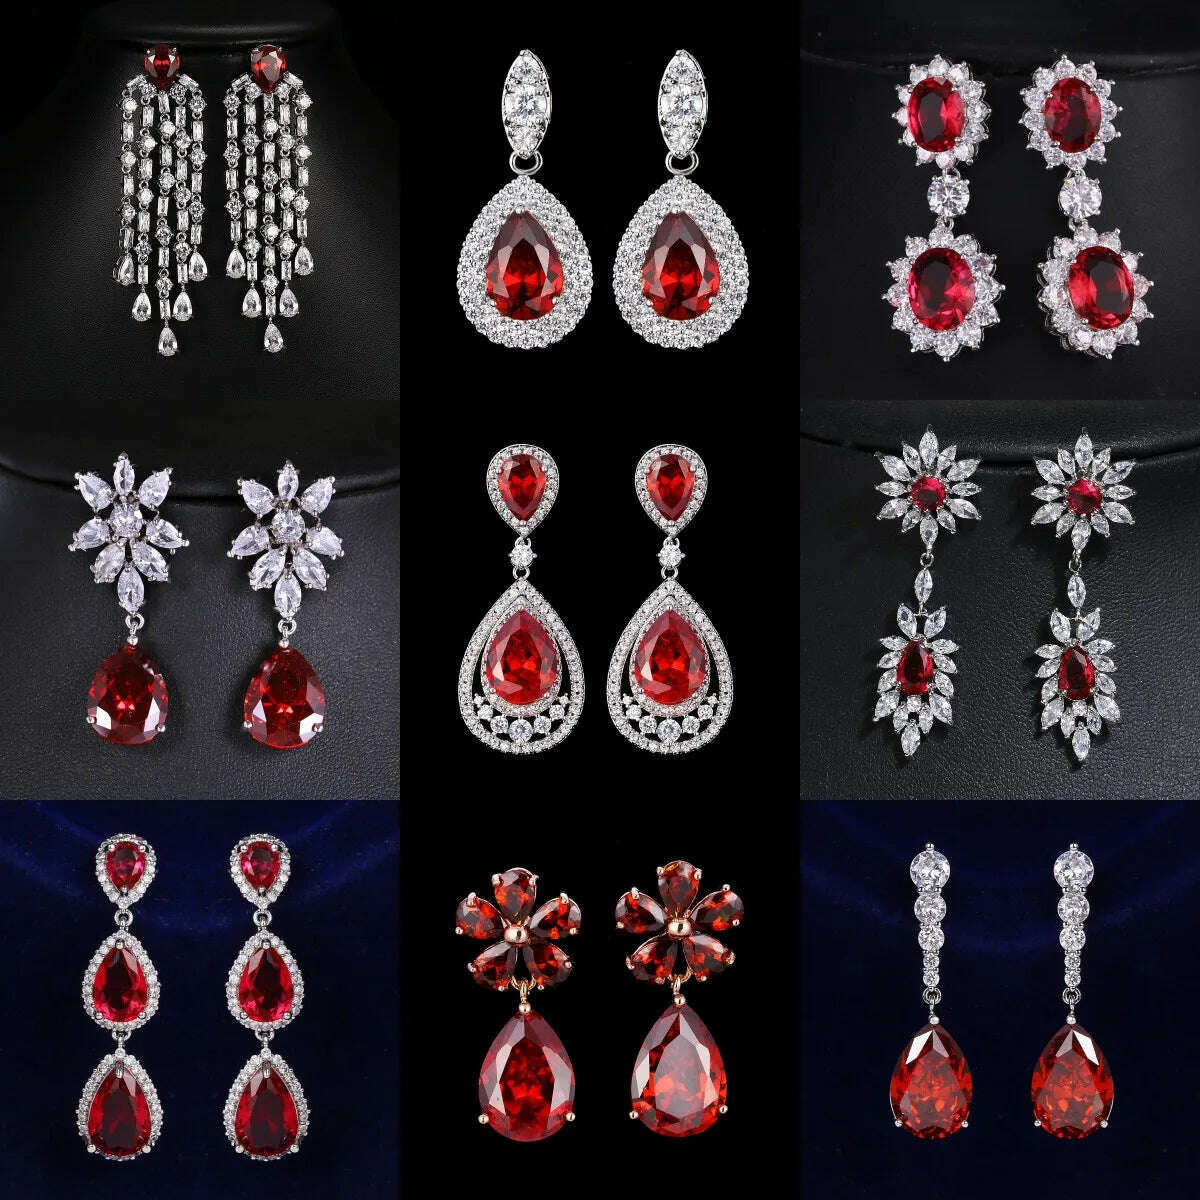 JMK Fashion Red Stone Cubic Zircon Dangle Earrings For Women Bridal Wedding Ruby Gemstone Jewelry Crystal Party Accessories Gift, KIMLUD Women's Clothes